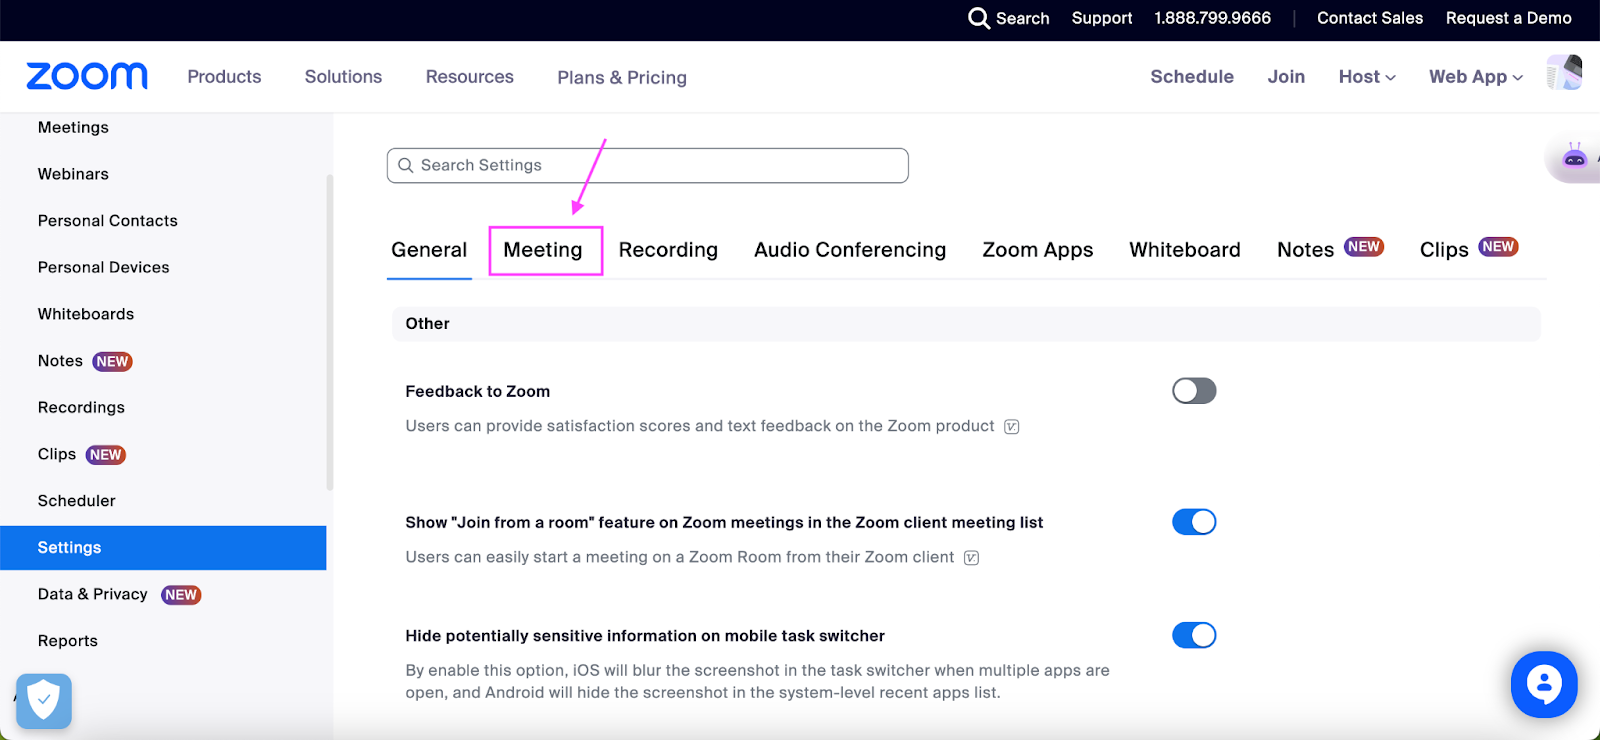 Zoom waiting room - How to enable Zoom Waiting Room for all meetings